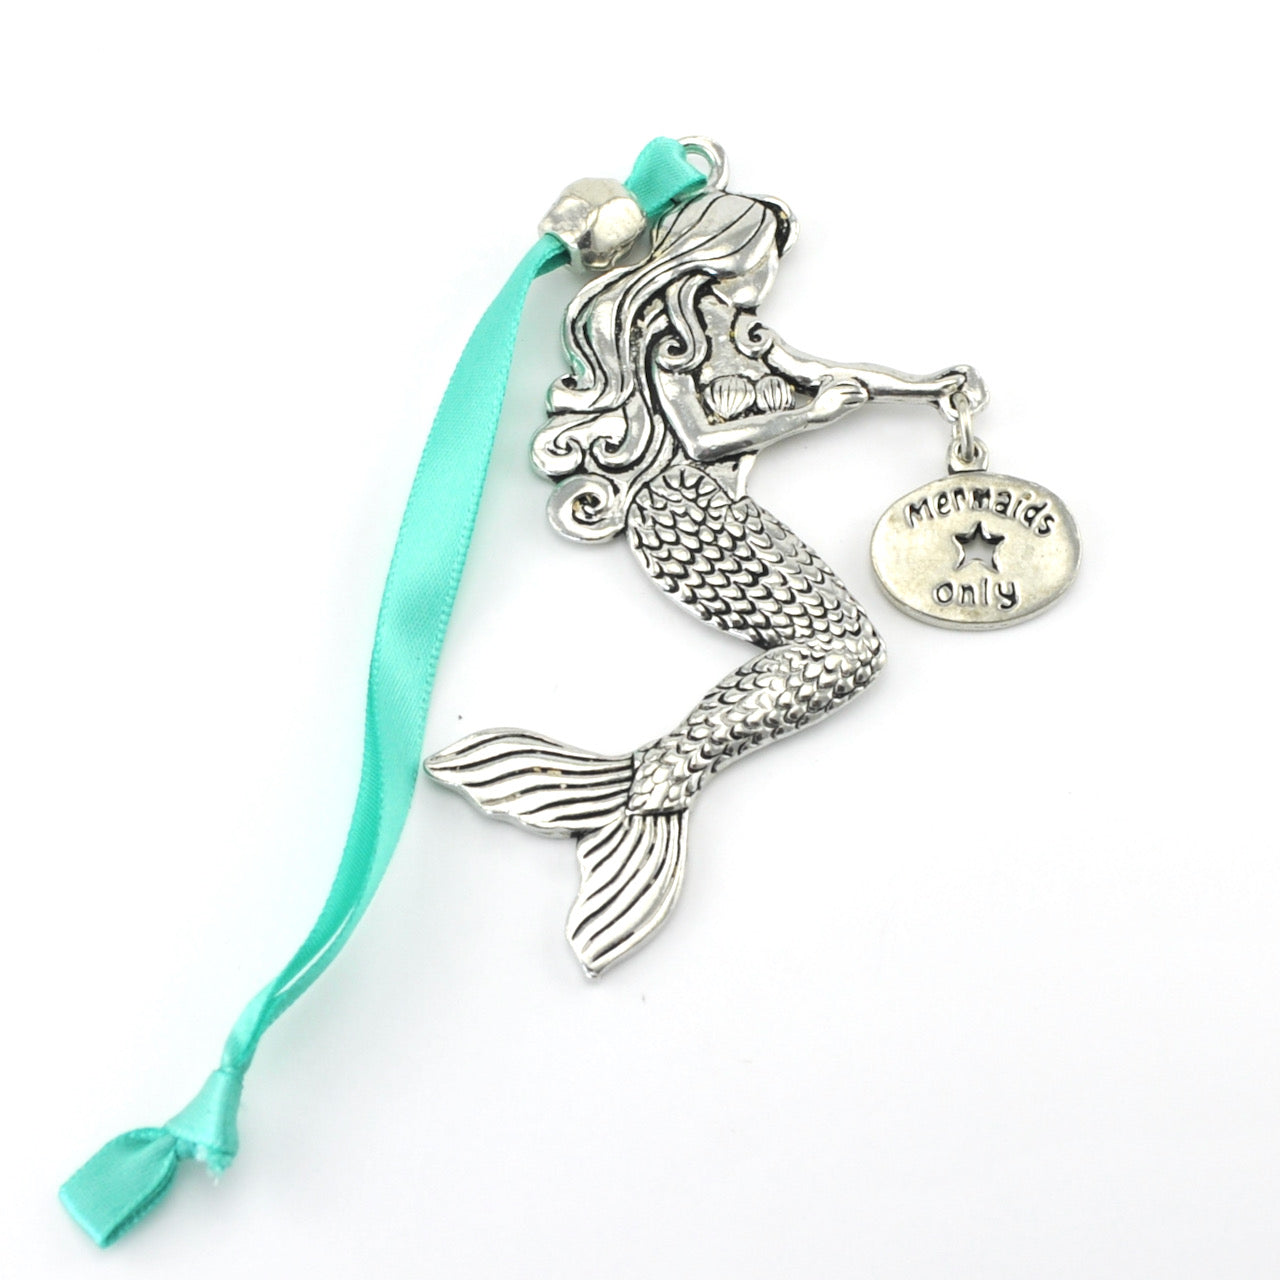 Pewter Mermaids Only Ornament